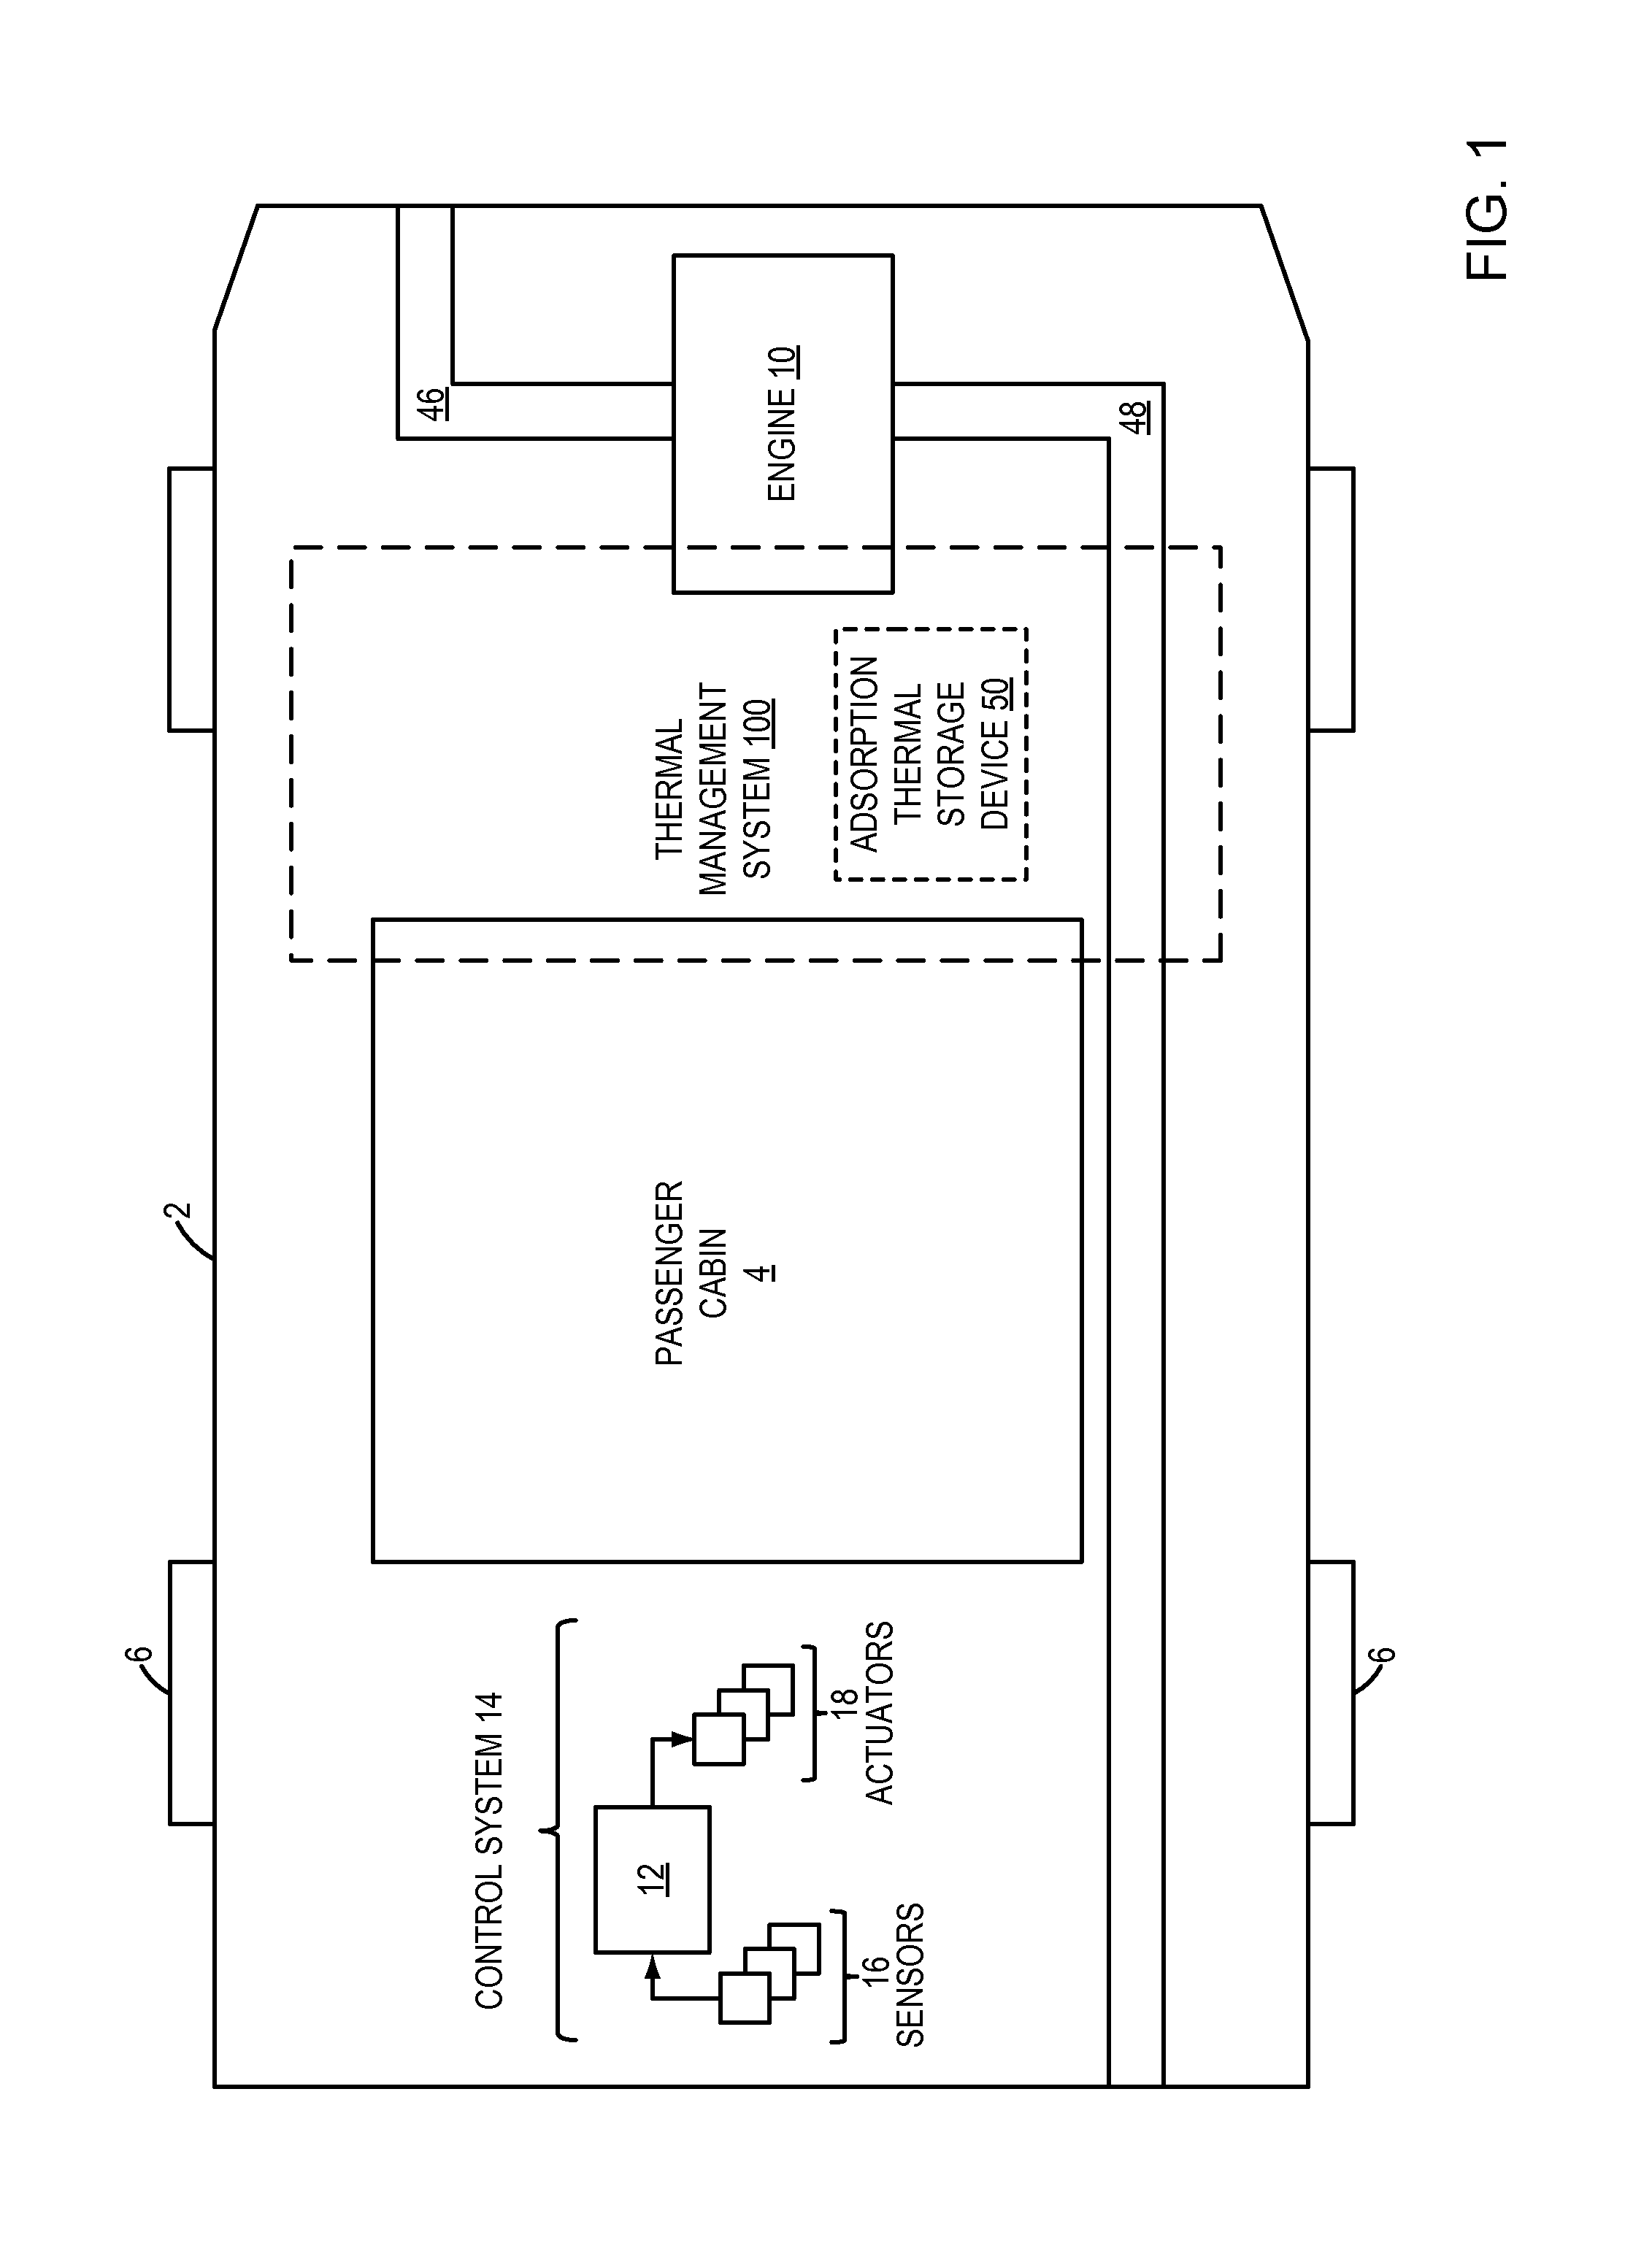 System for thermal management of a vehicle and method for vehicle cold start